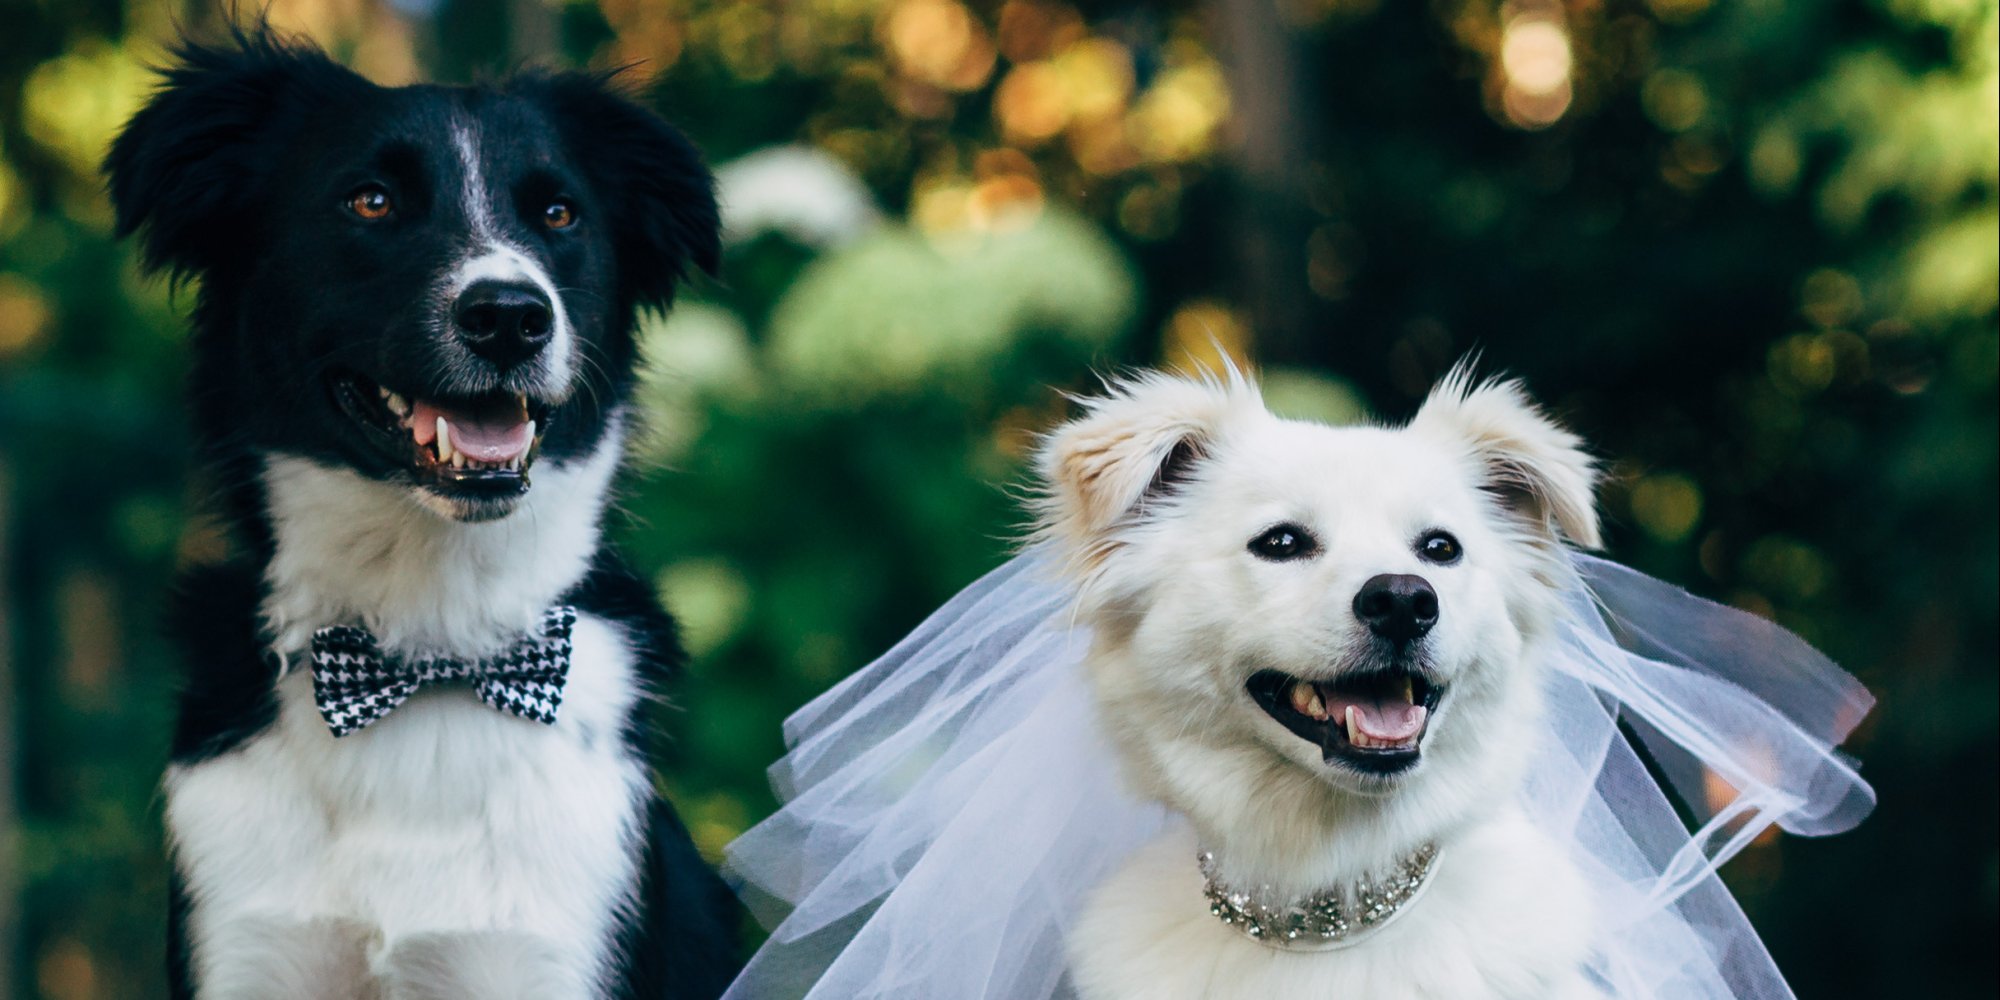 These Furry Friends Made Their Love Official In The Cutest